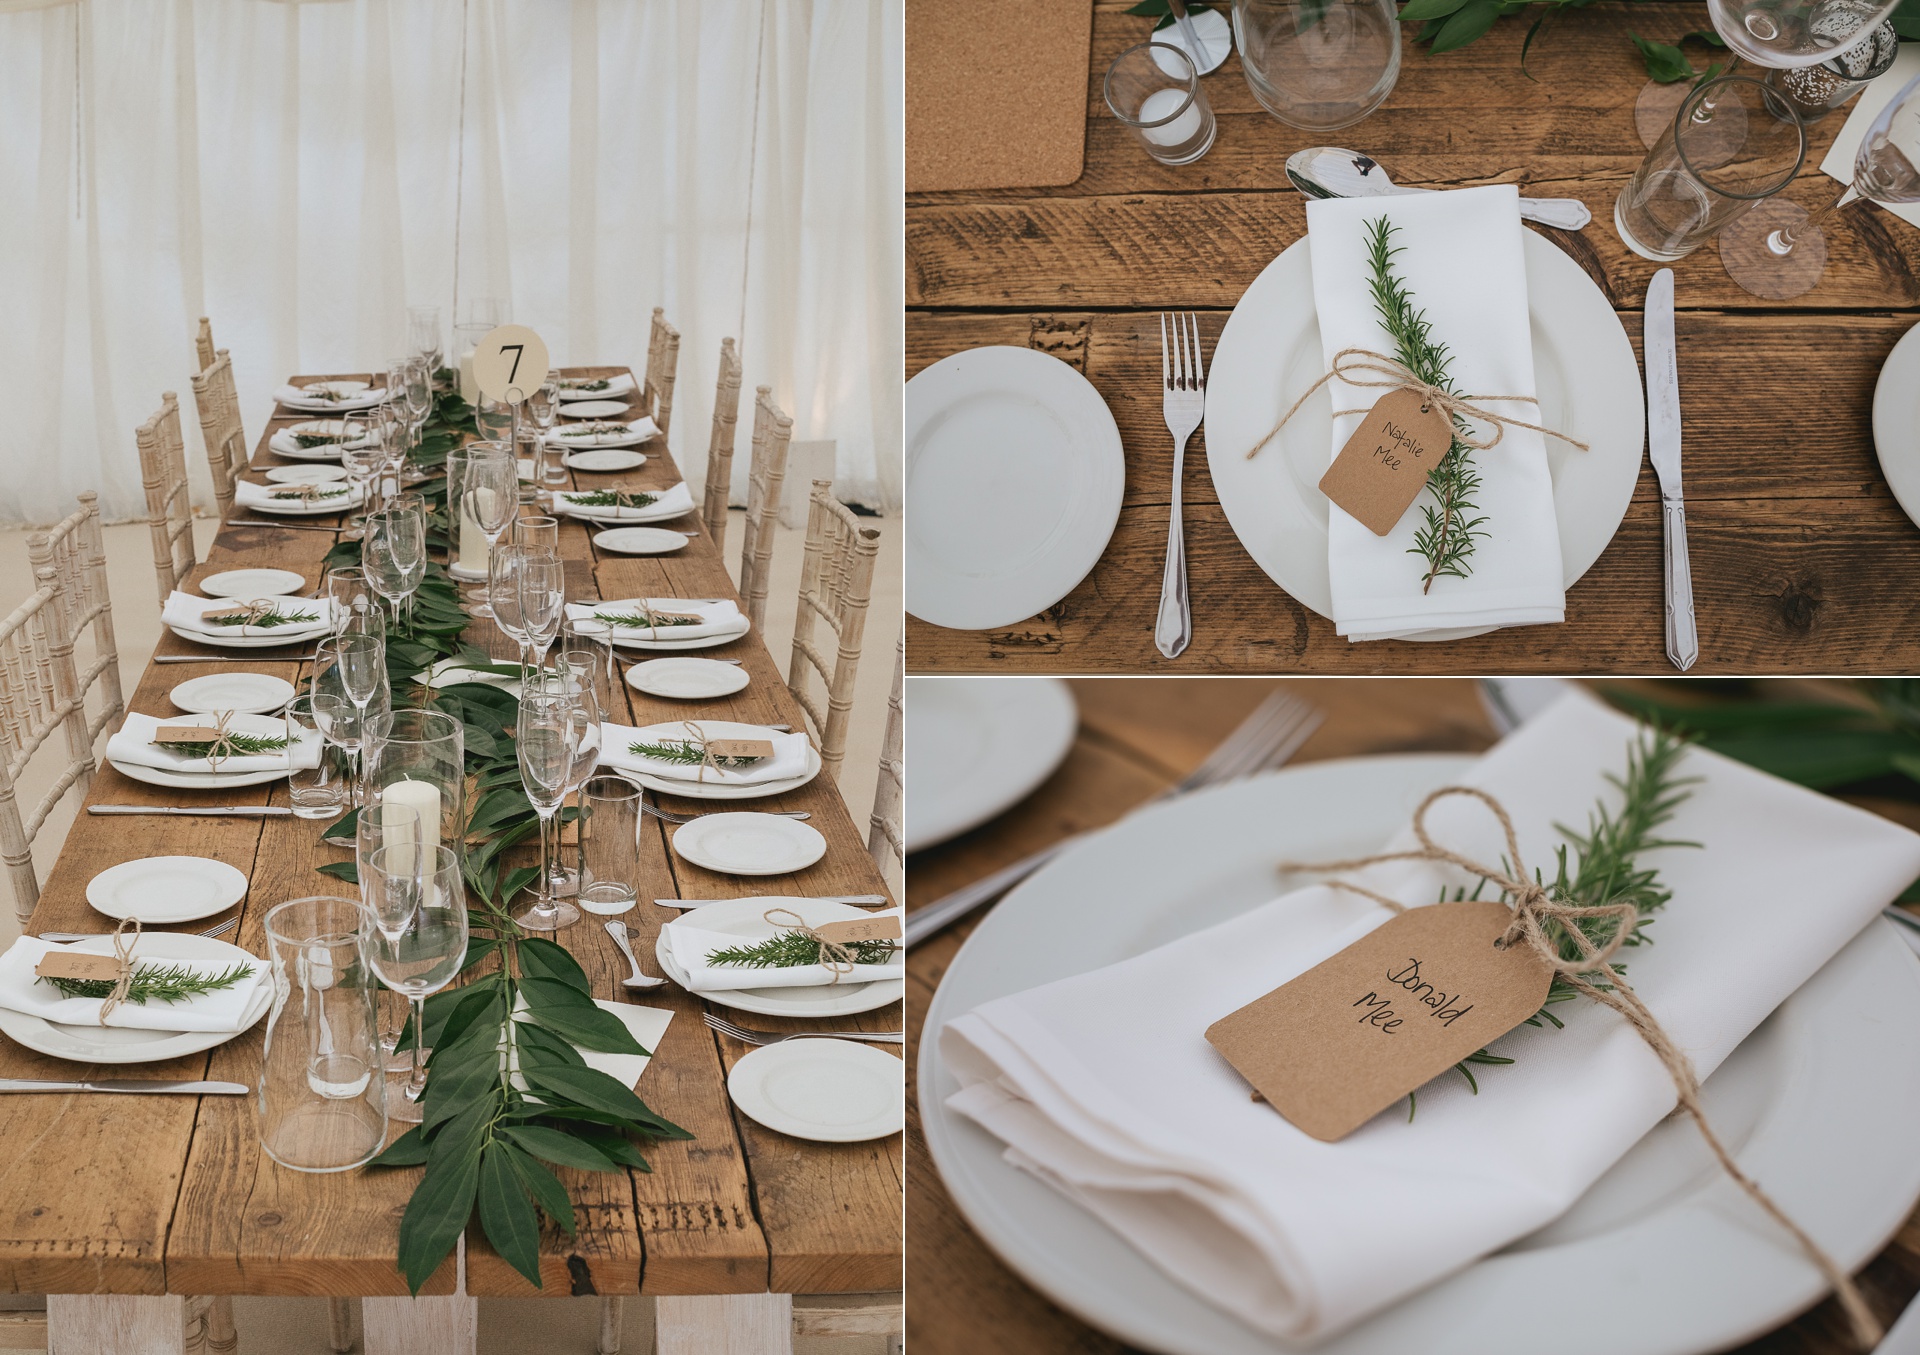 Long trestle table with greenery and rustic place settings